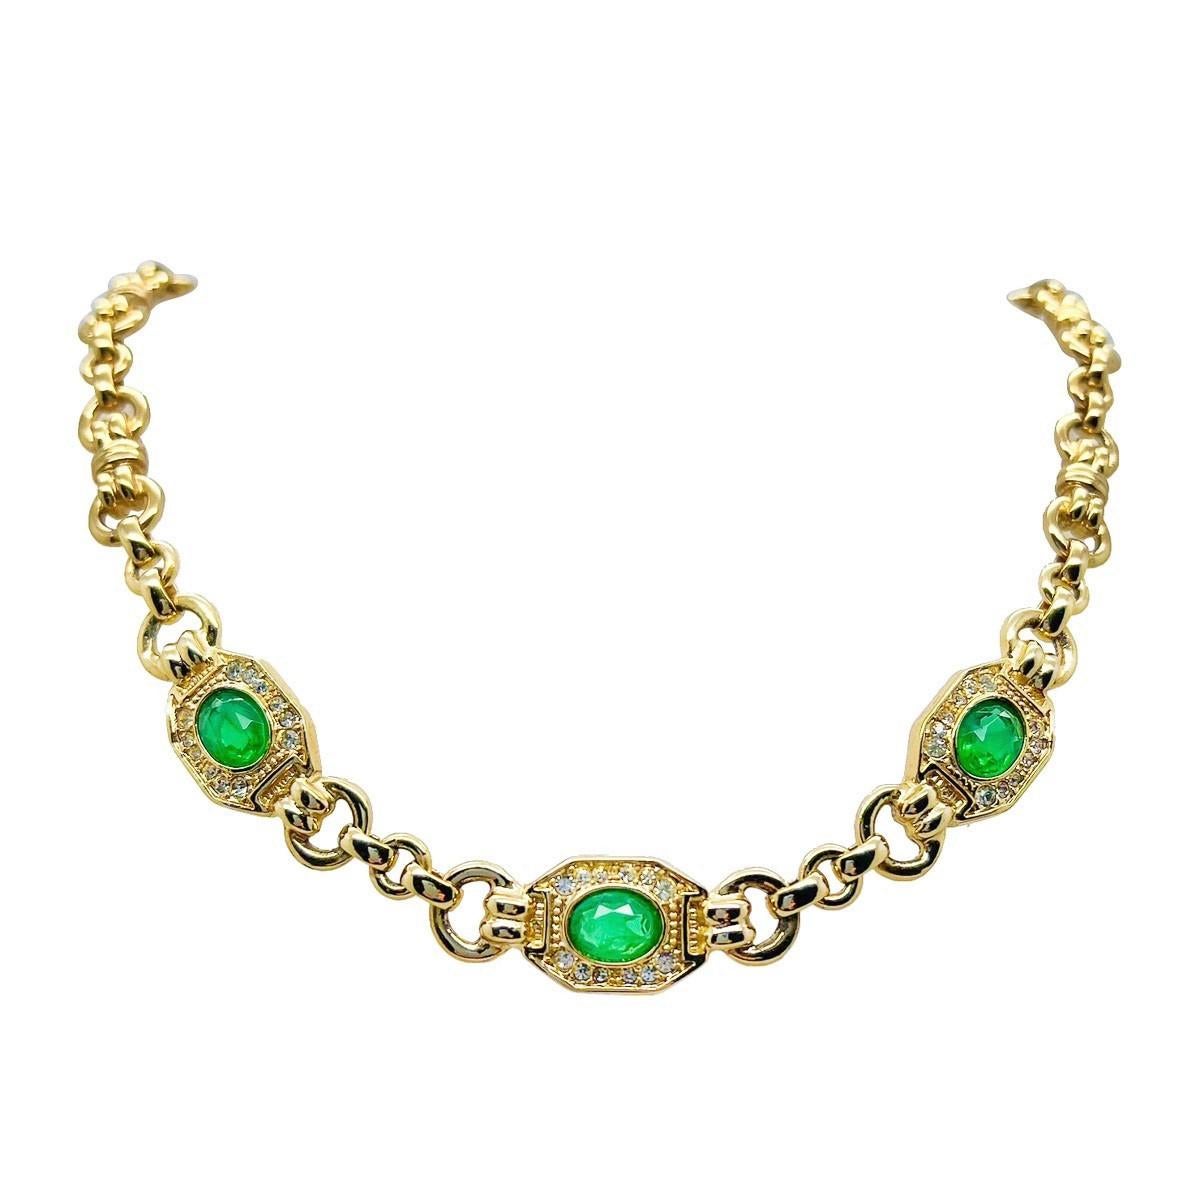 A Vintage Grossé Emerald Crystal Necklace. Oozing the look of emerald and diamond this chain necklace by Grossé plays to all the design strengths of this luxury costume jeweller. A chunky fancy link chain in lustrous gold plate is interspersed with